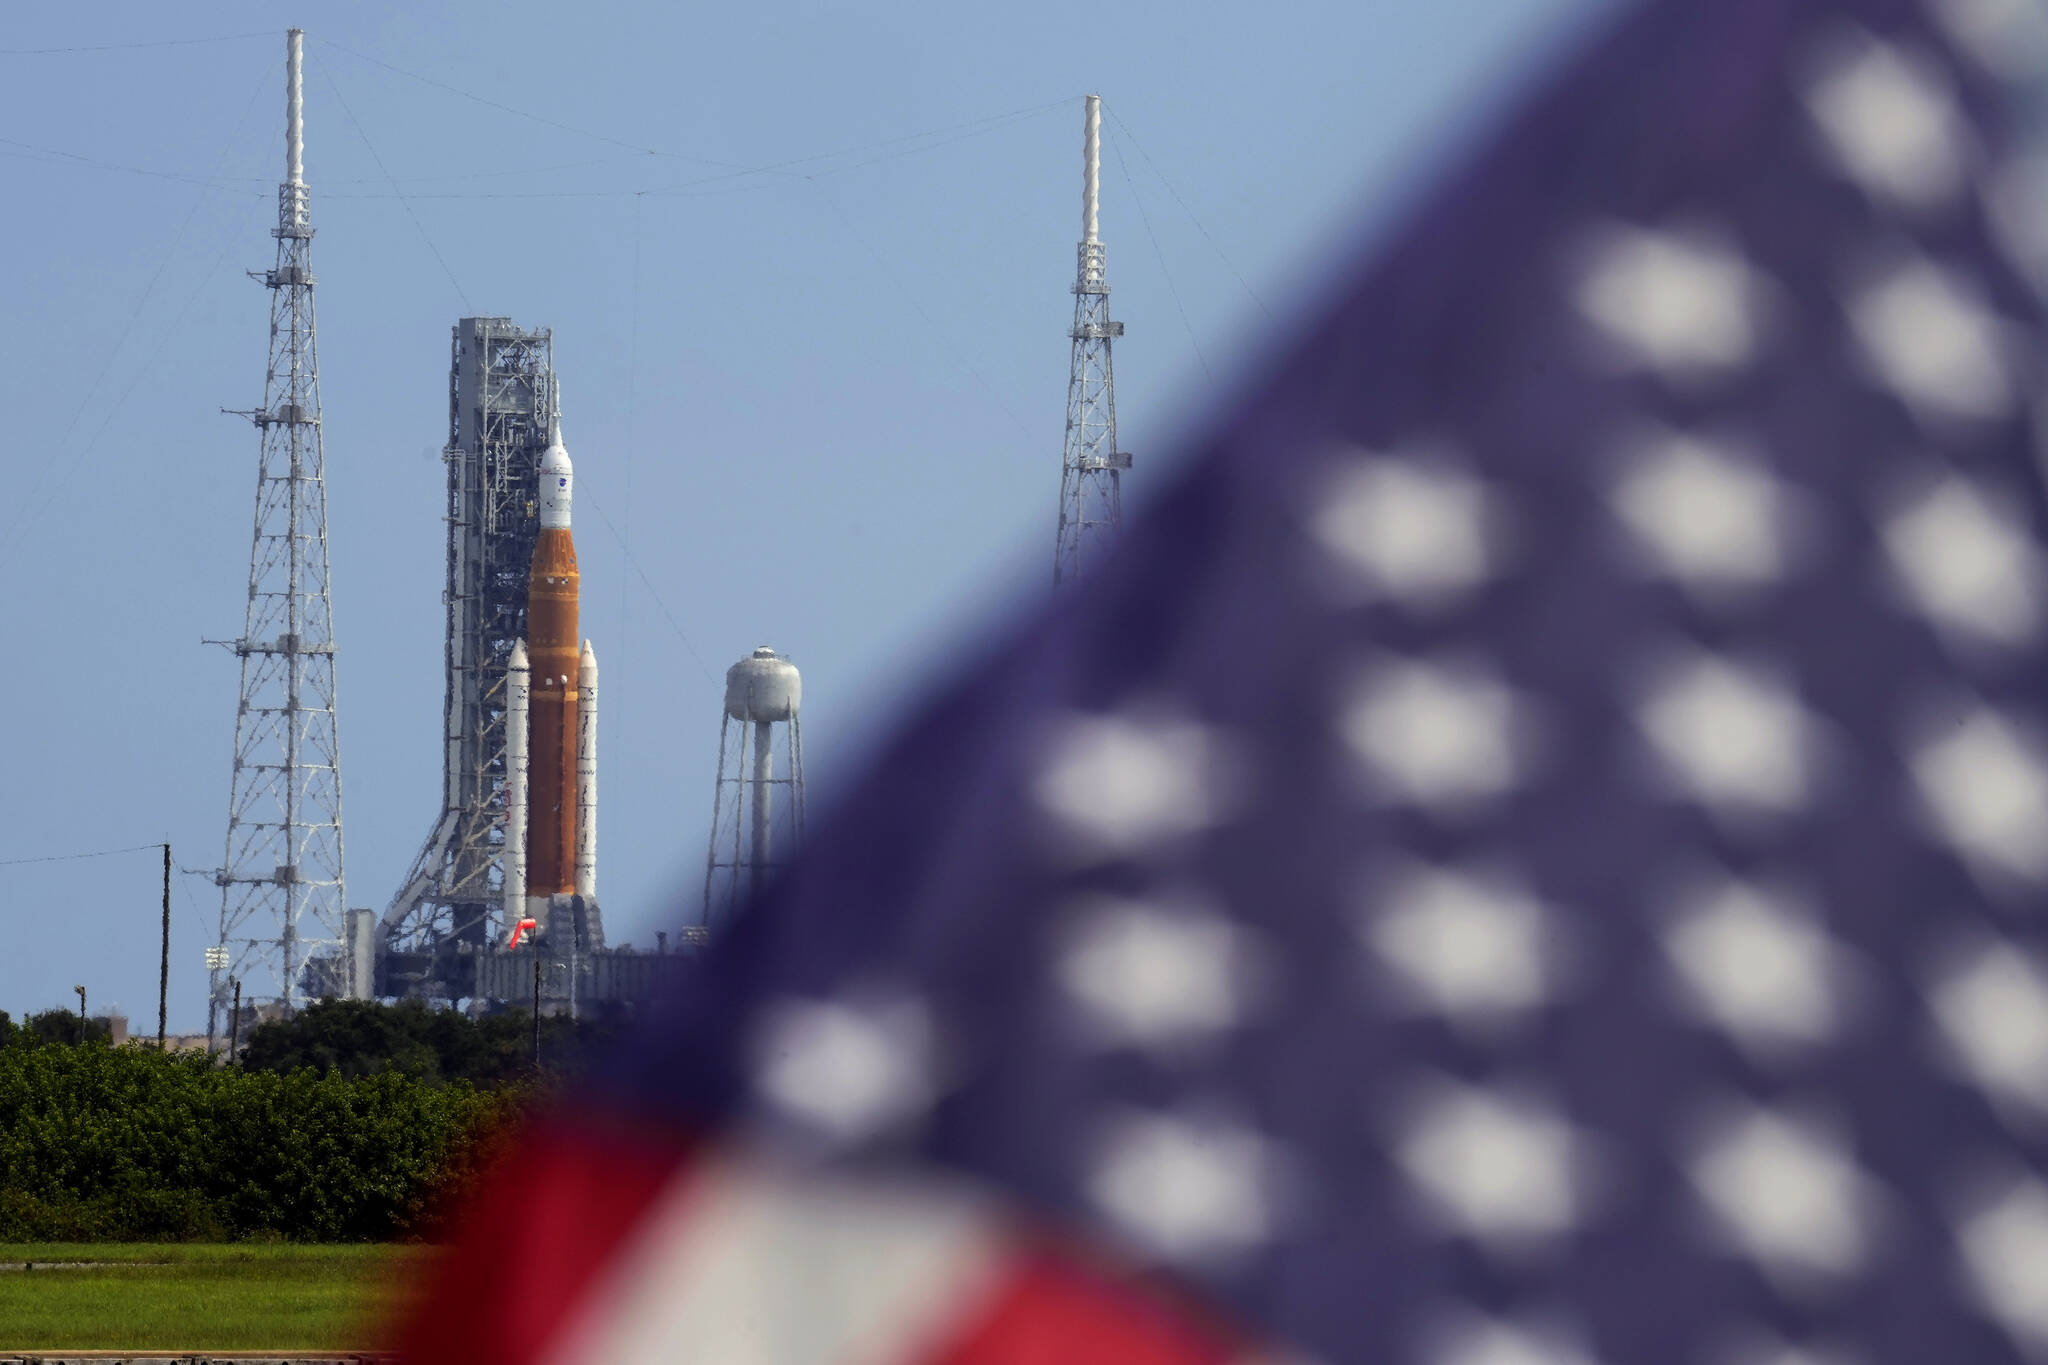 An American flag flies in the breeze as NASA's new moon rocket sits on Launch Pad 39-B after being scrubbed at the Kennedy Space Center Saturday, Sept. 3, 2022, in Cape Canaveral, Fla. This is scheduled to be the first flight of NASA's 21st-century moon-exploration program, named Artemis after Apollo's mythological twin sister. (AP Photo / Chris O'Meara)